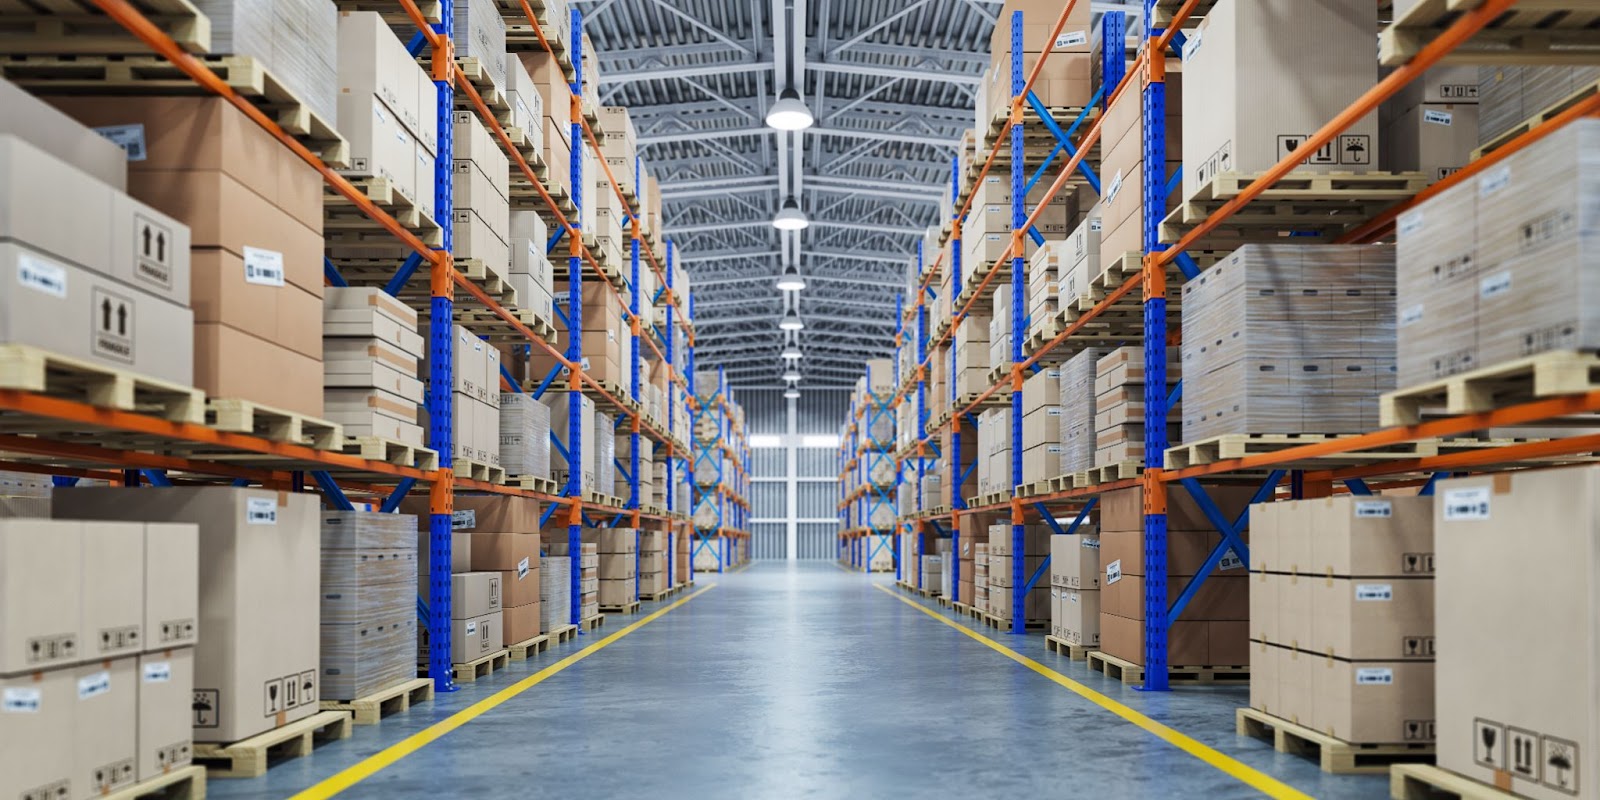 Warehouse or storage and shelves with cardboard boxes